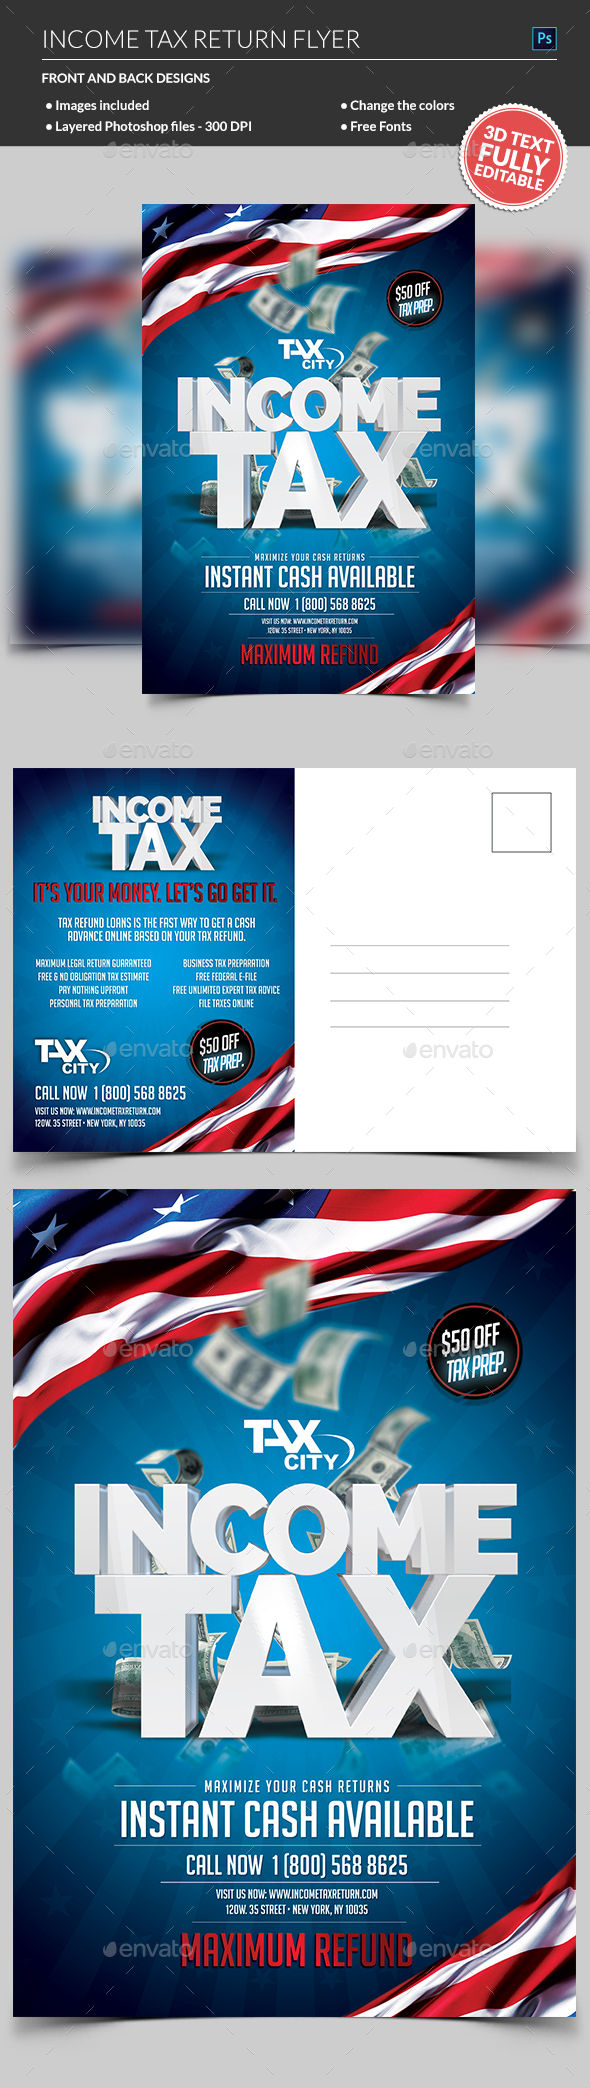 Tax Graphics, Designs & Templates from GraphicRiver Throughout Tax Preparer Flyer Template In Tax Preparer Flyer Template